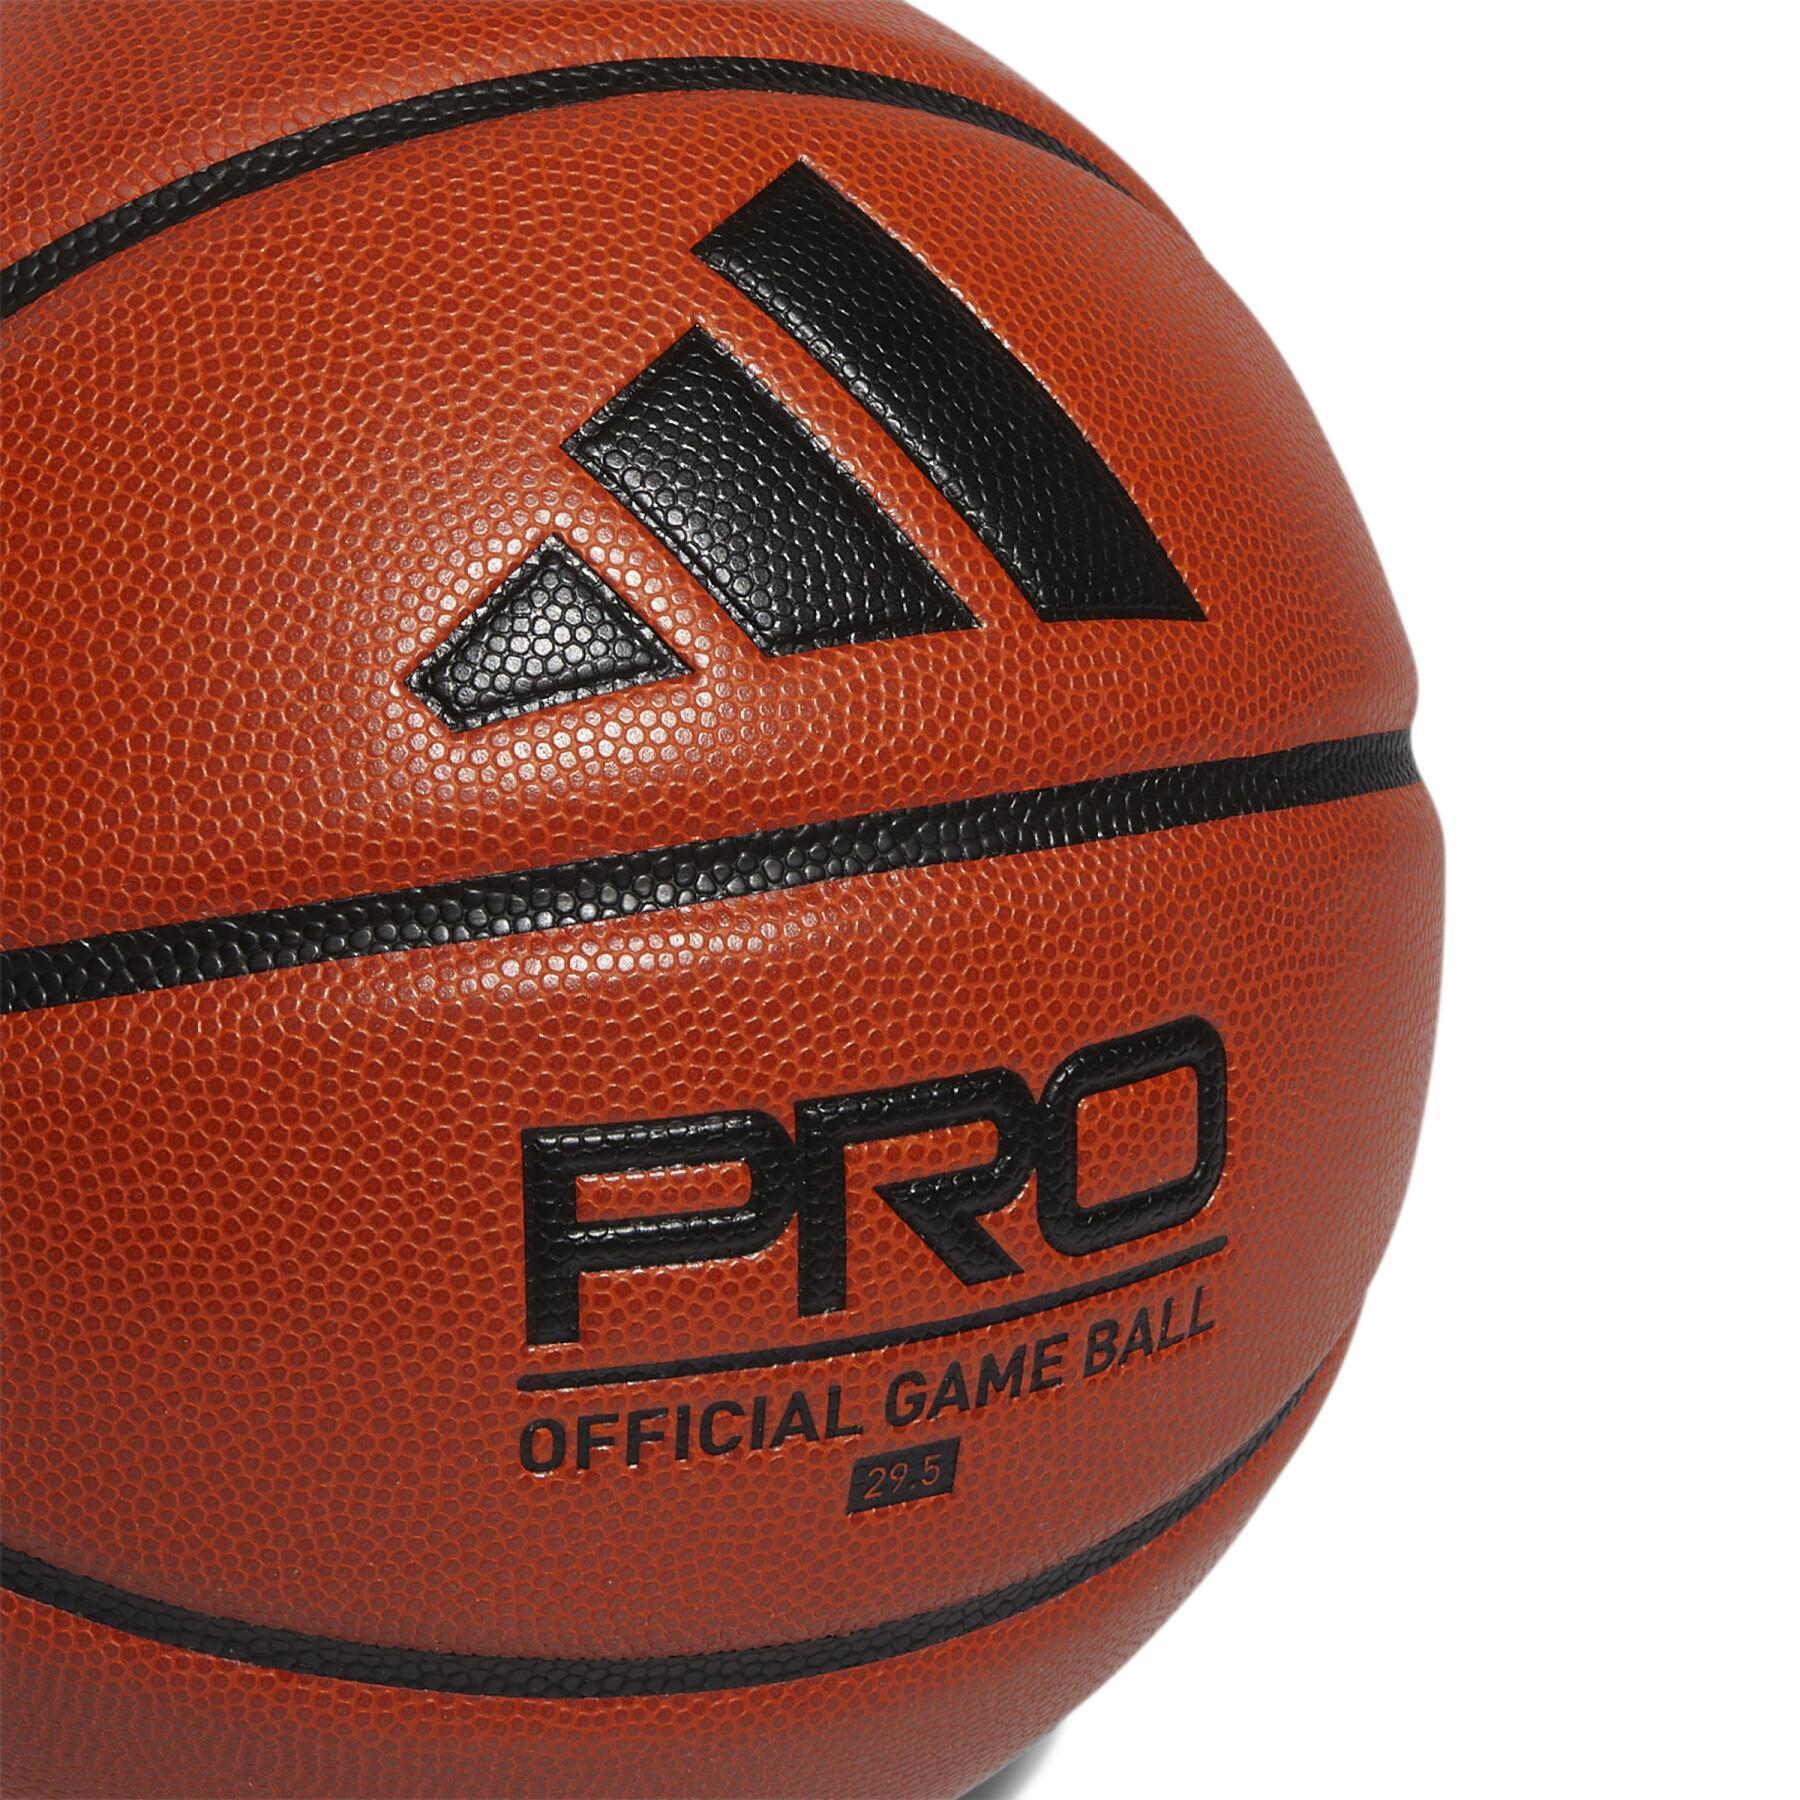 Basketball adidas Pro 3.0 Official Game